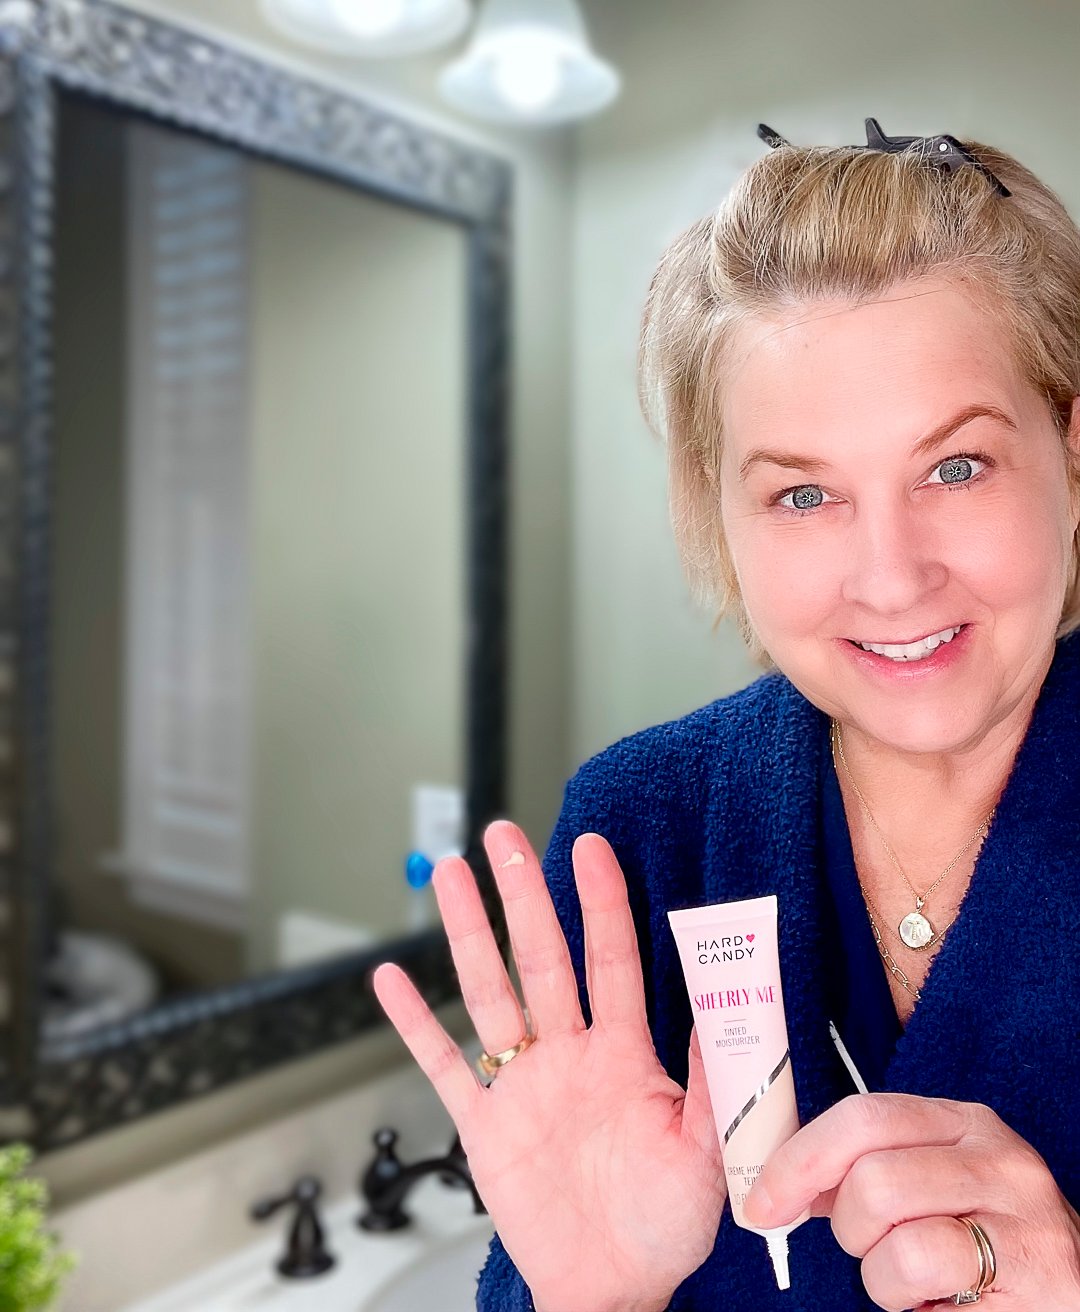 Over 40 Fashion Blogger, Tania Stephens is trying products from Walmart Beauty for August 20224